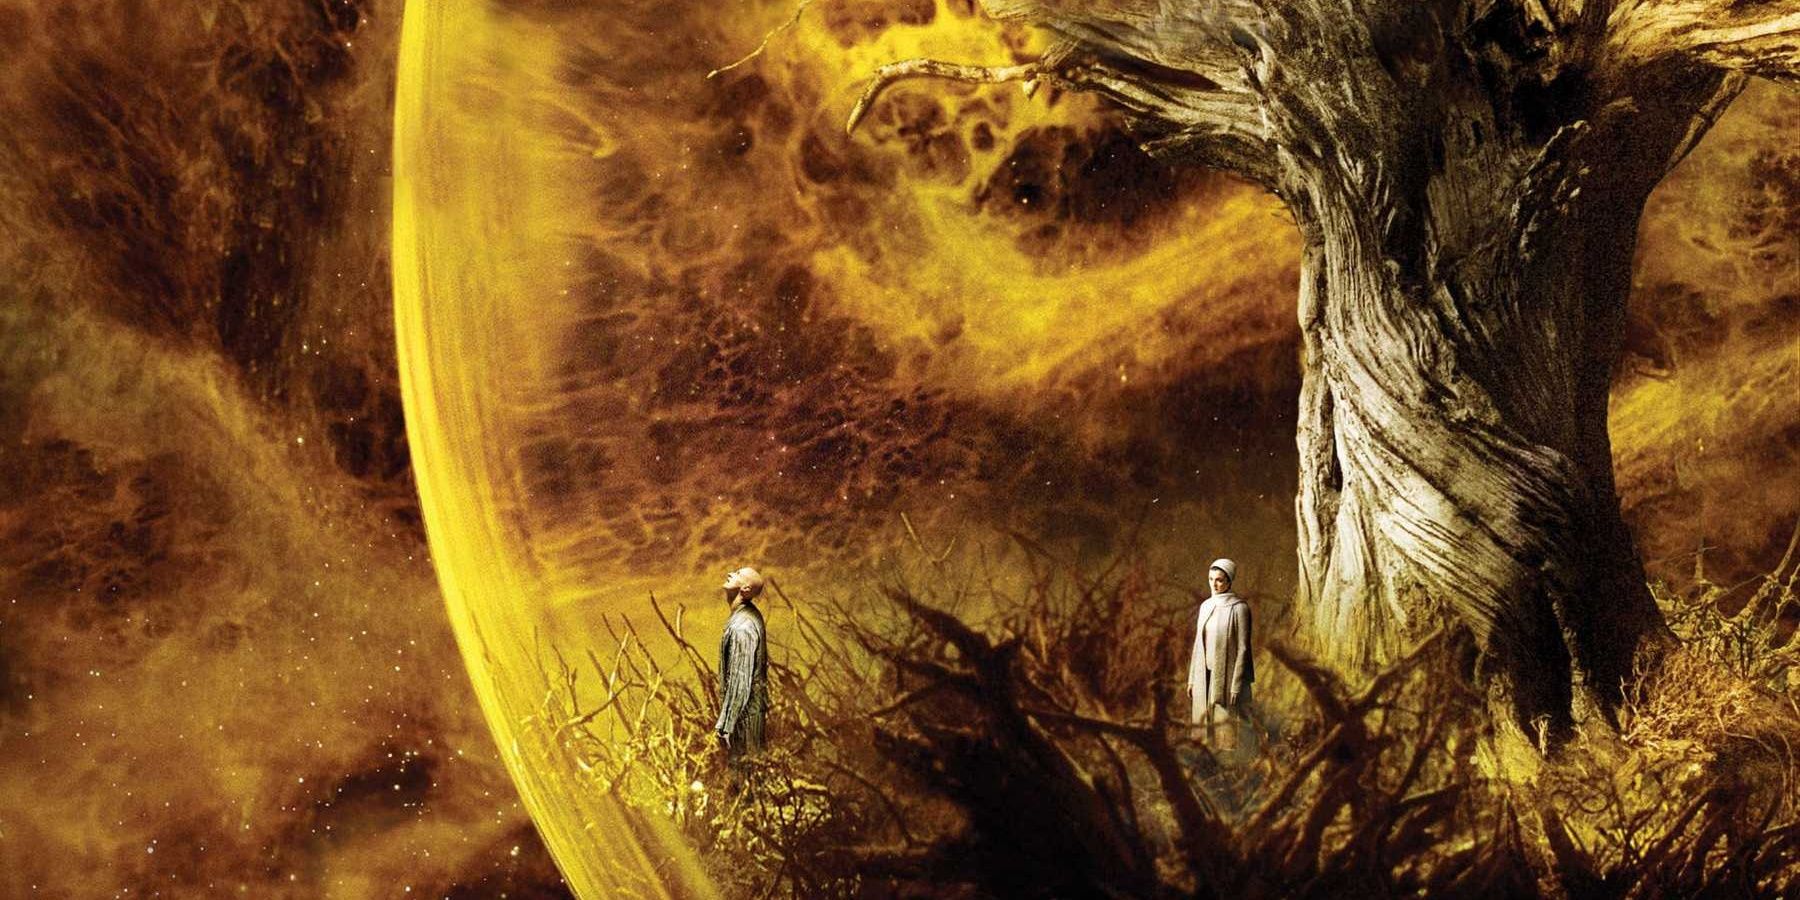 10 Most Visually Stunning SciFi Movies Of The 21st Century So Far